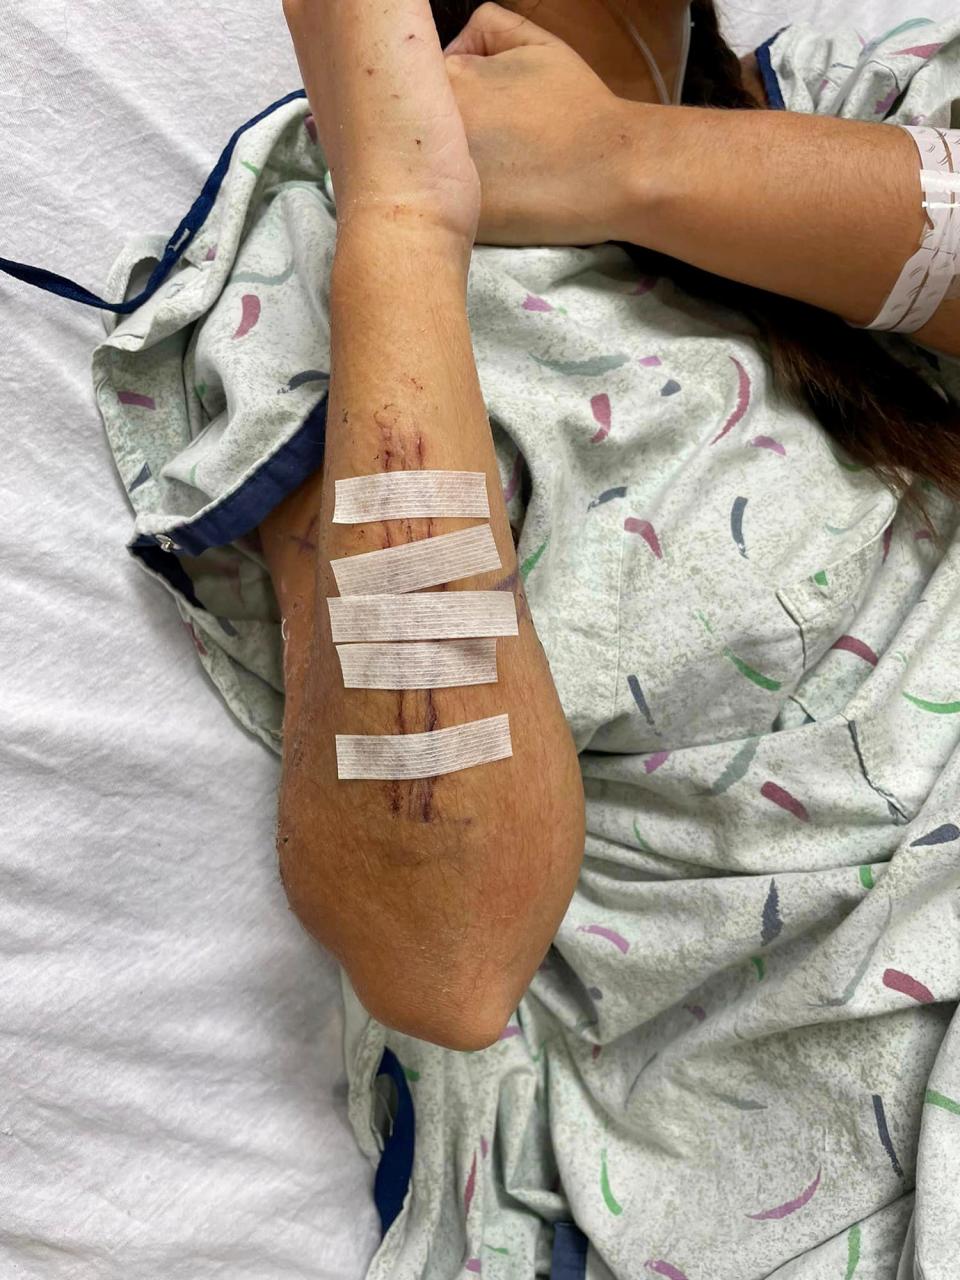 Mia Virag, 23, of Spring Lake, was hospitalized for 38 days with life-threatening injuries after getting hit by a speeding dirt bike rider as she headed to her new job as a foster care specialist. To date, she has had 12 surgeries, including to her liver, spleen, kidneys, lungs and right arm.